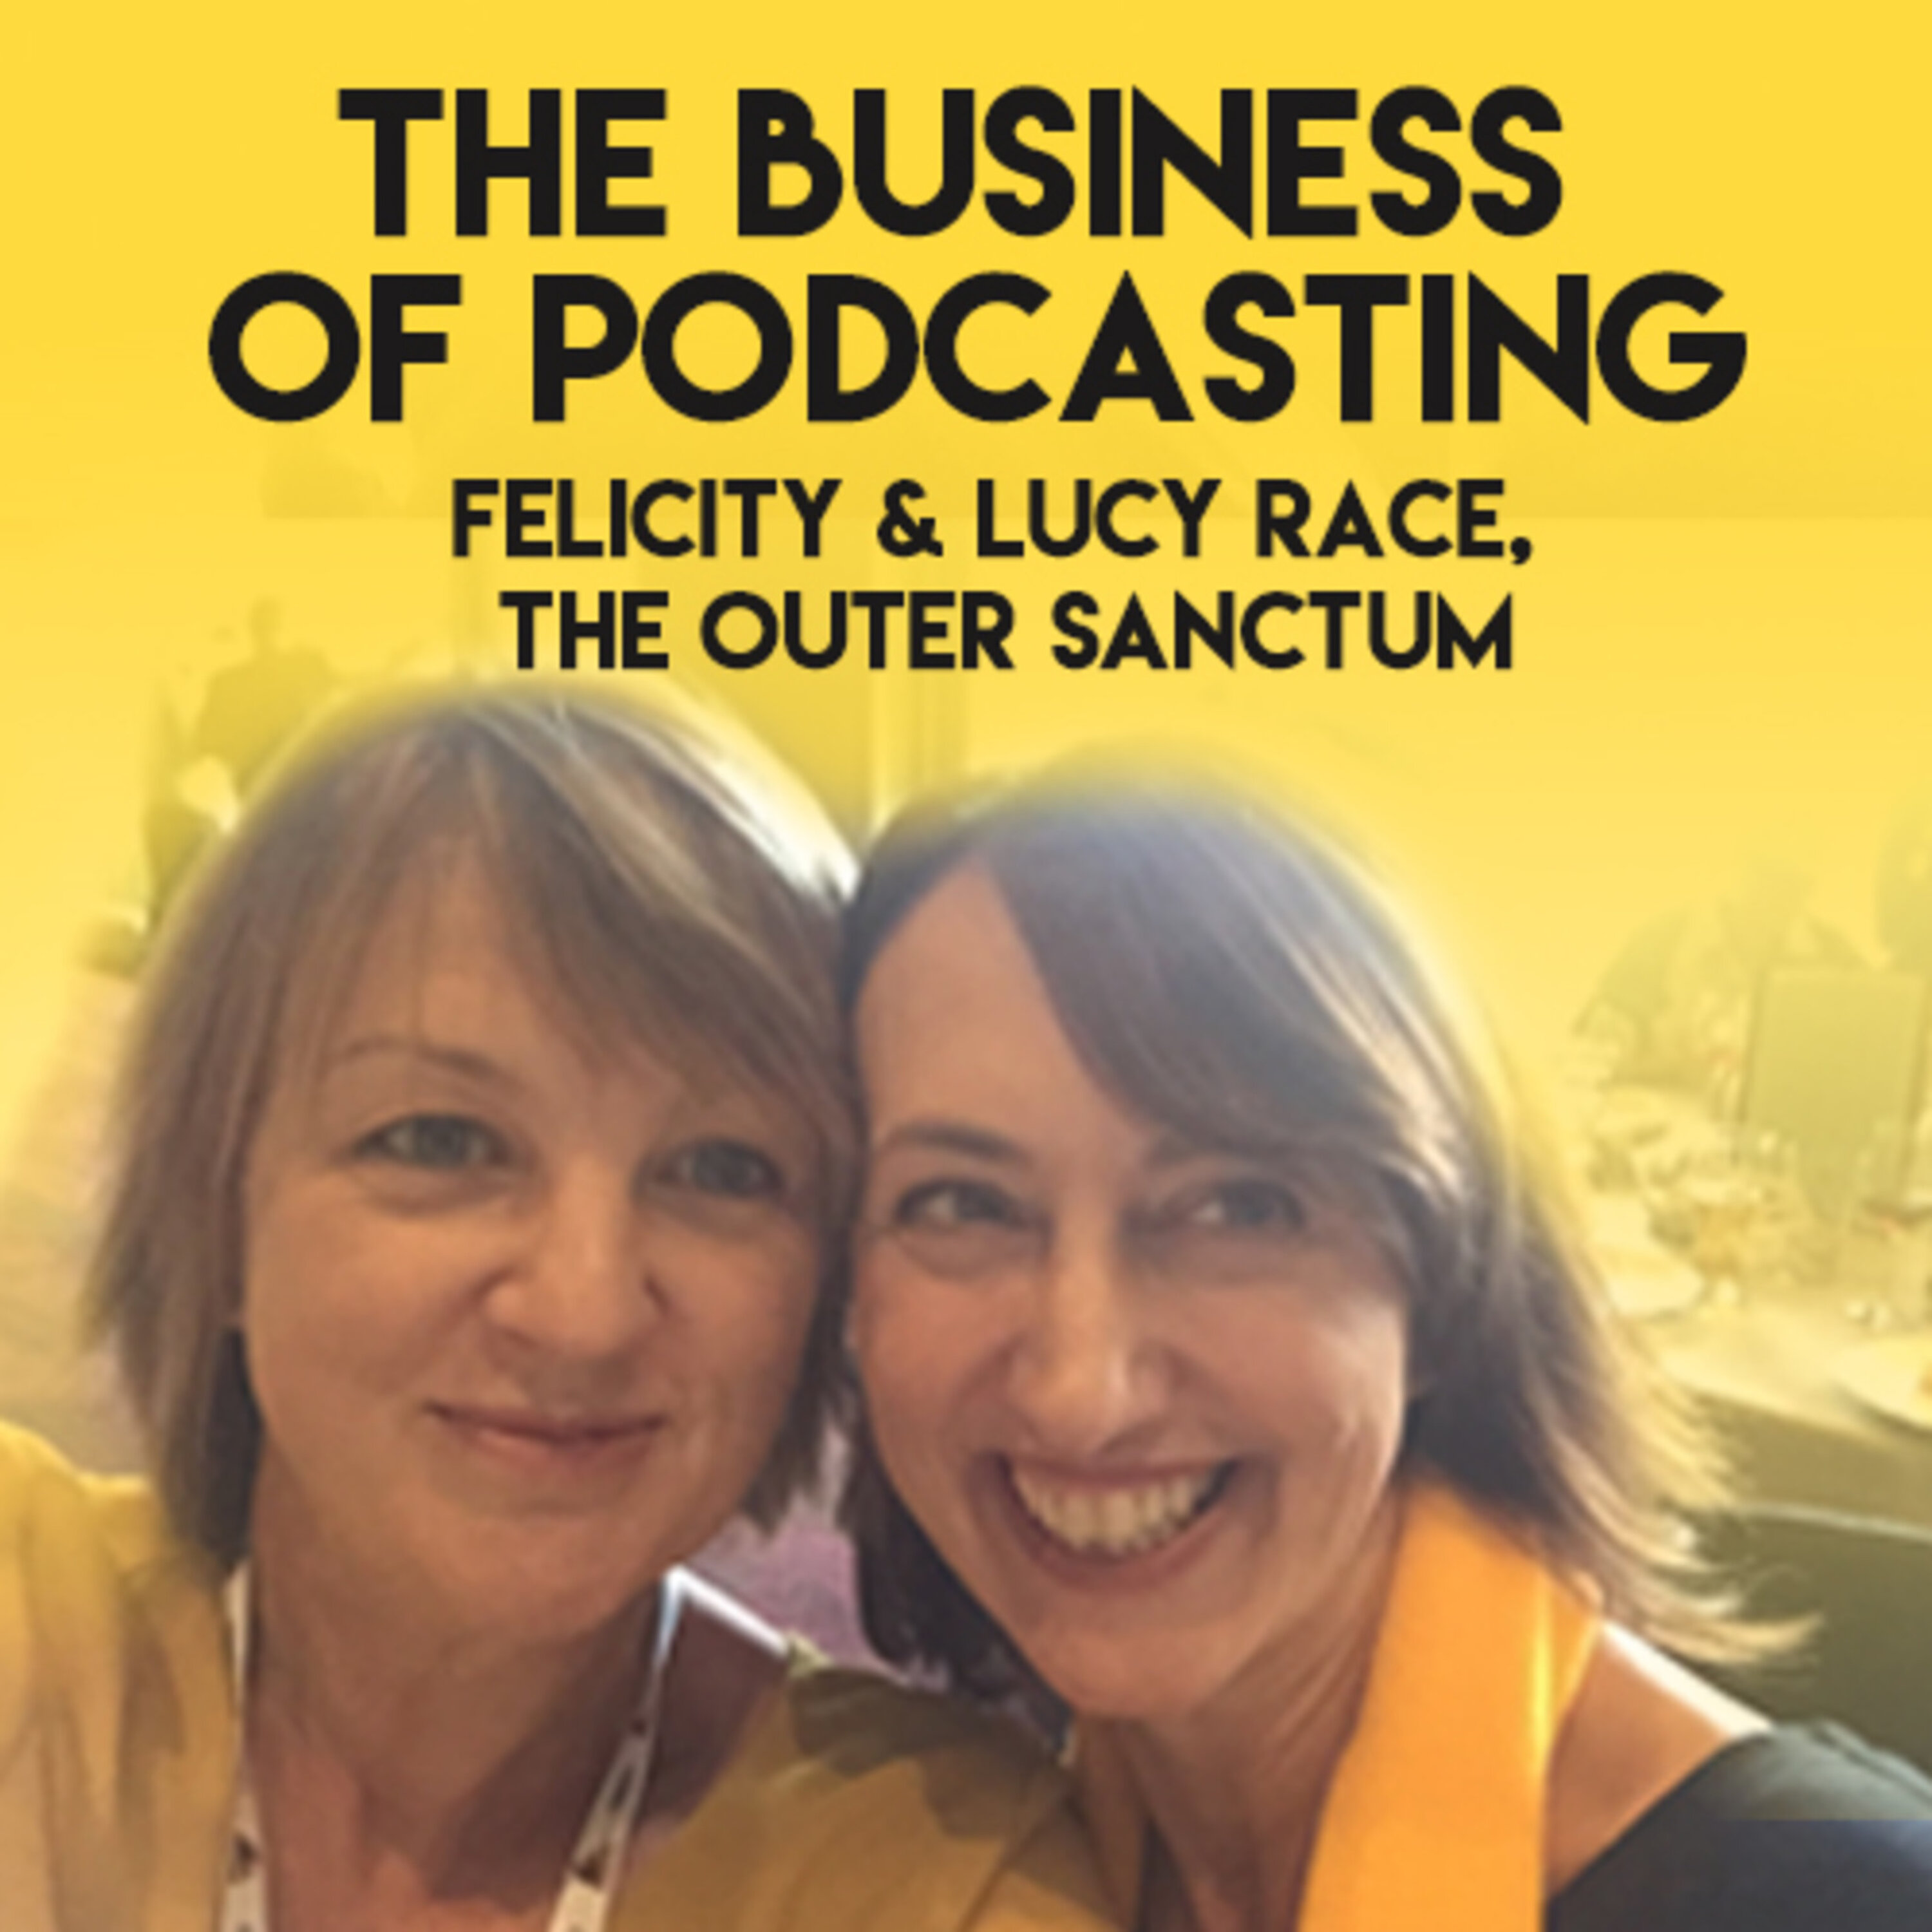 Turning a podcast into a business is the key focus for the hosts of The Outer Sanctum podcast | #383